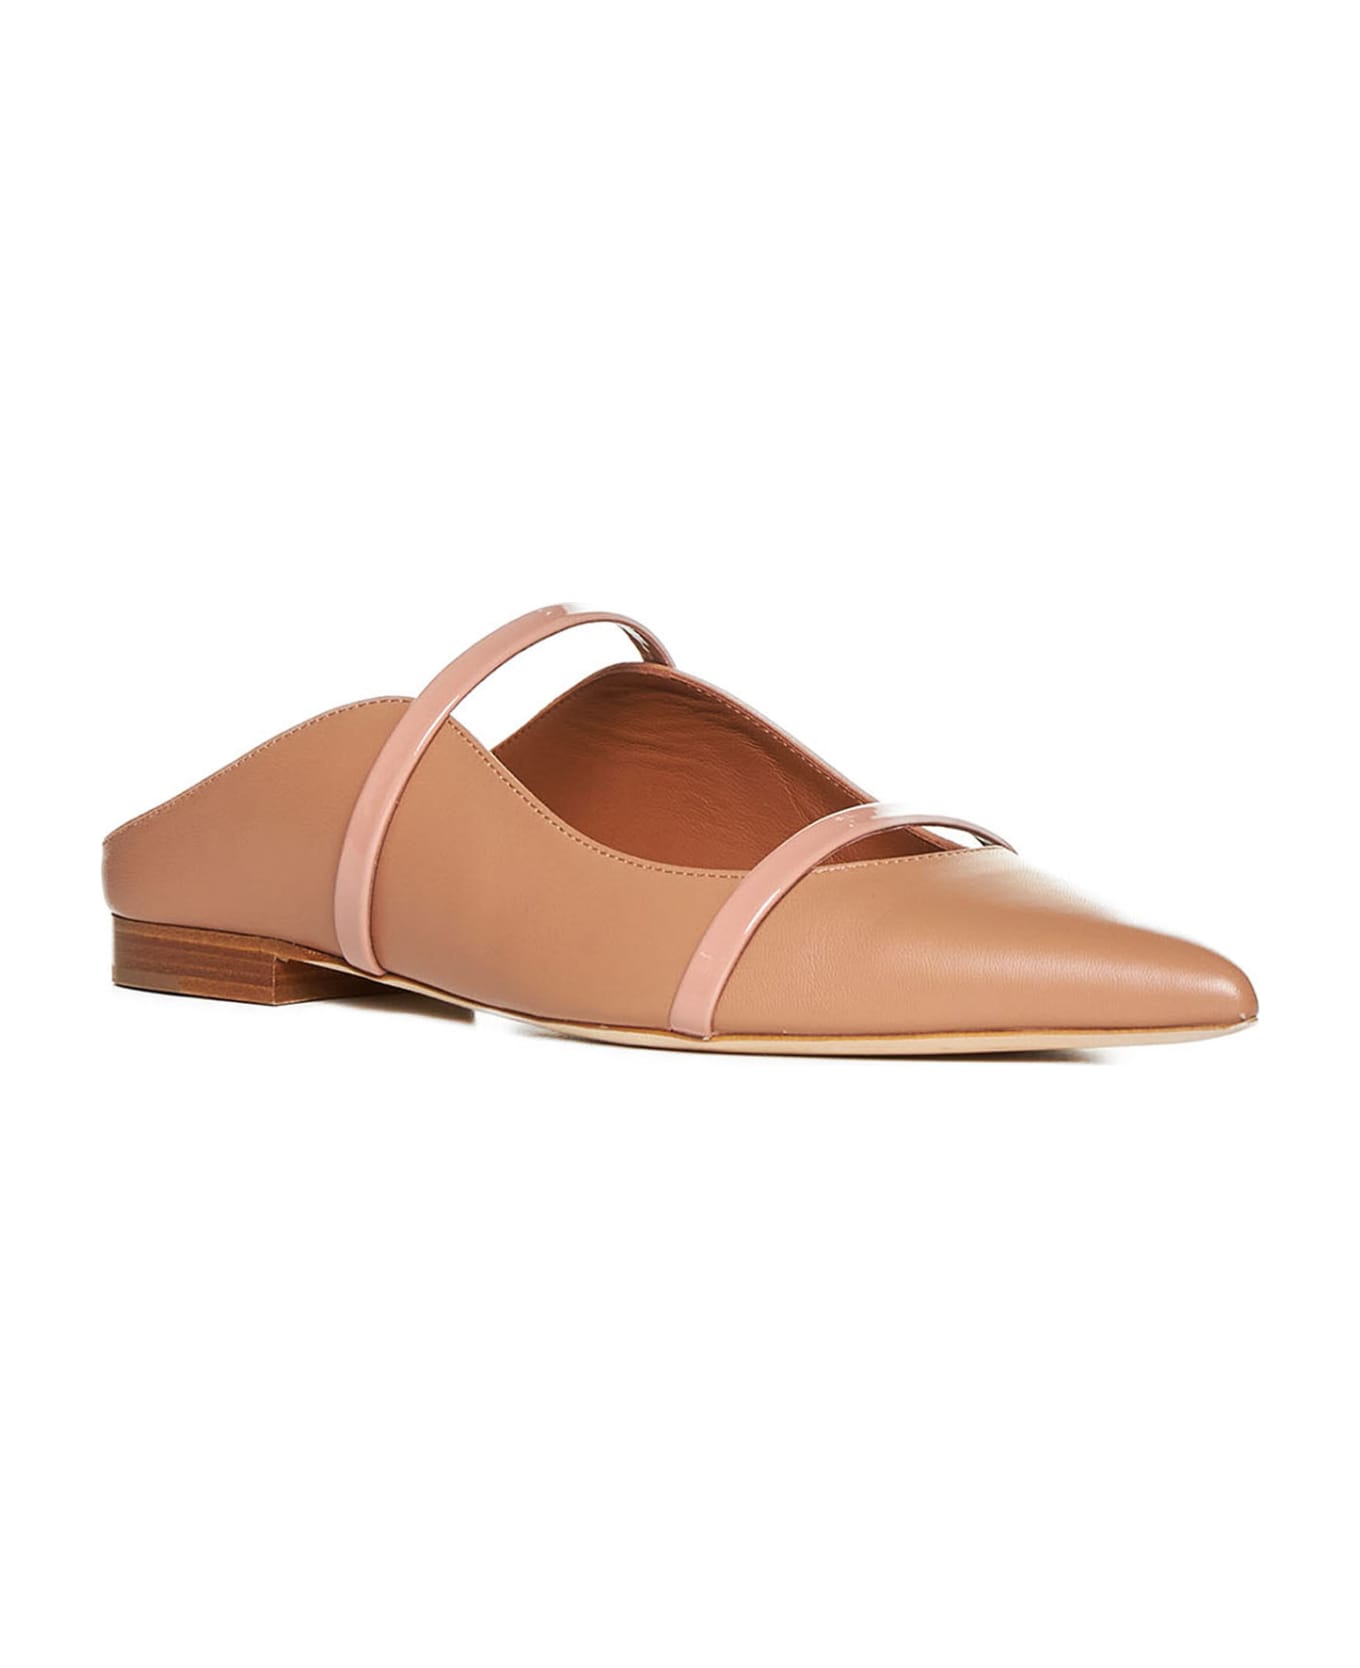 Malone Souliers Sandals - Nude/blush